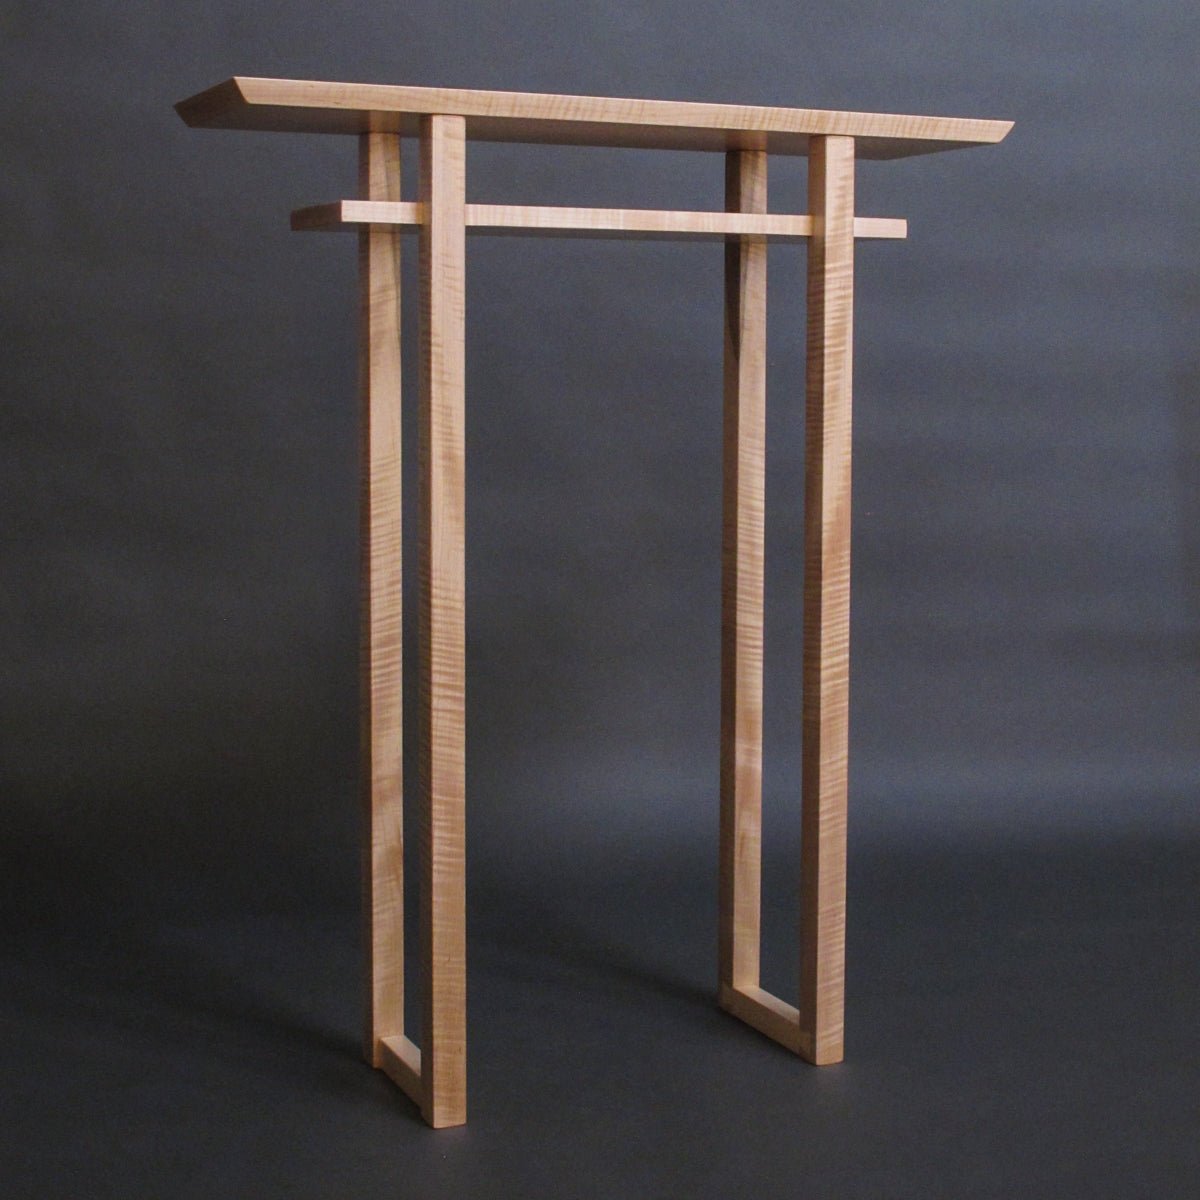 A tall narrow entry table handmade from tiger maple by Mokuzai Furniture.